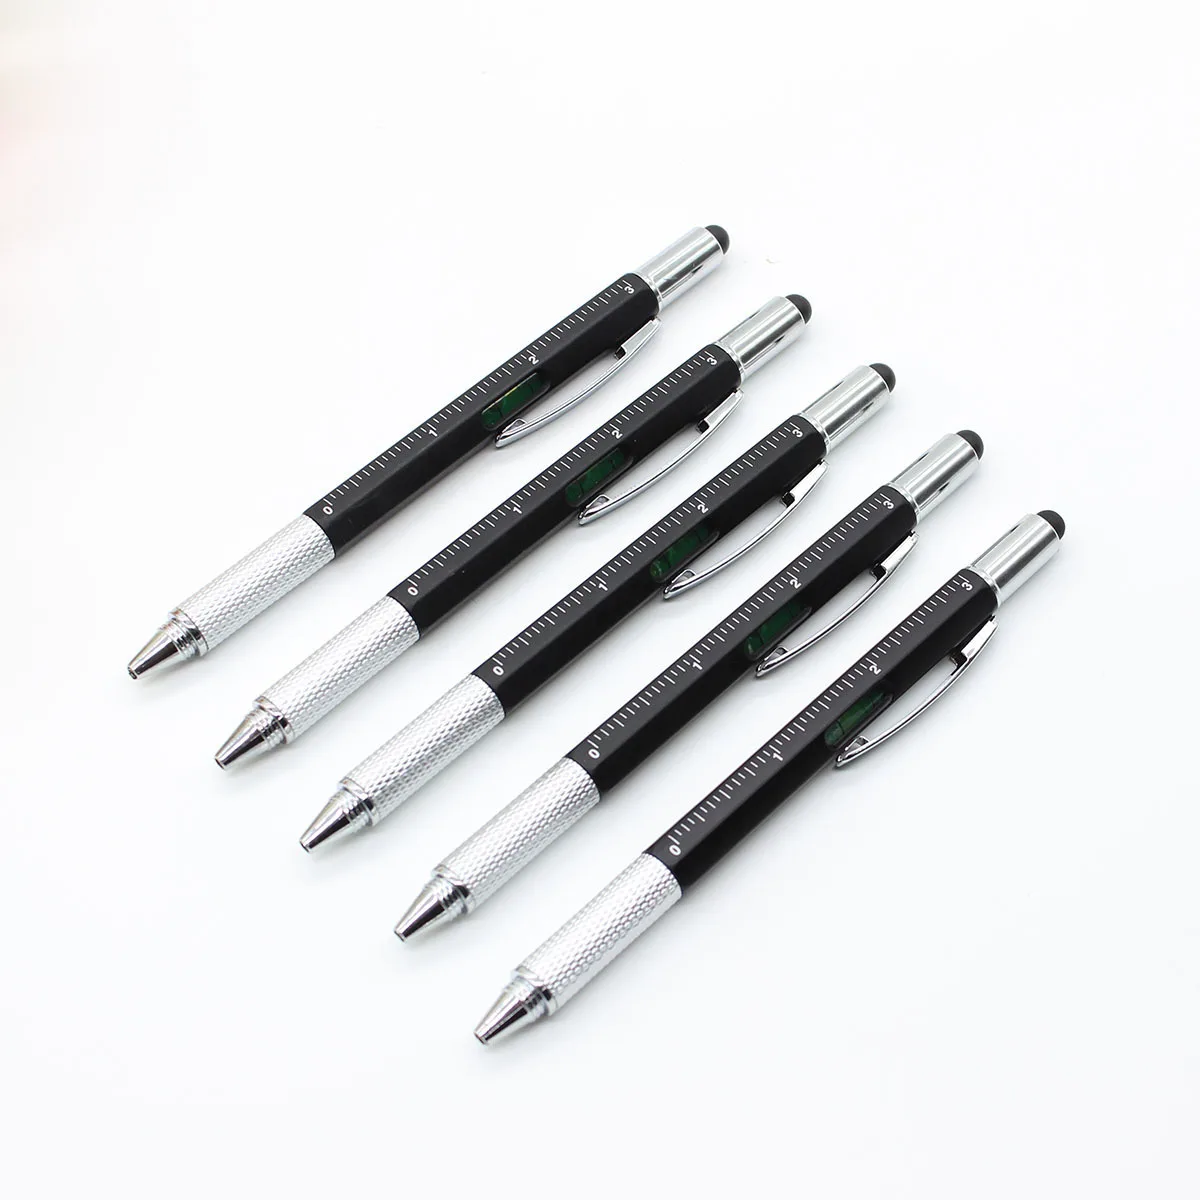 

6 in1 Multifunction Ballpoint Pen with Modern Handheld Tool Measure Technical Ruler Screwdriver Touch Screen Stylus Spirit Level